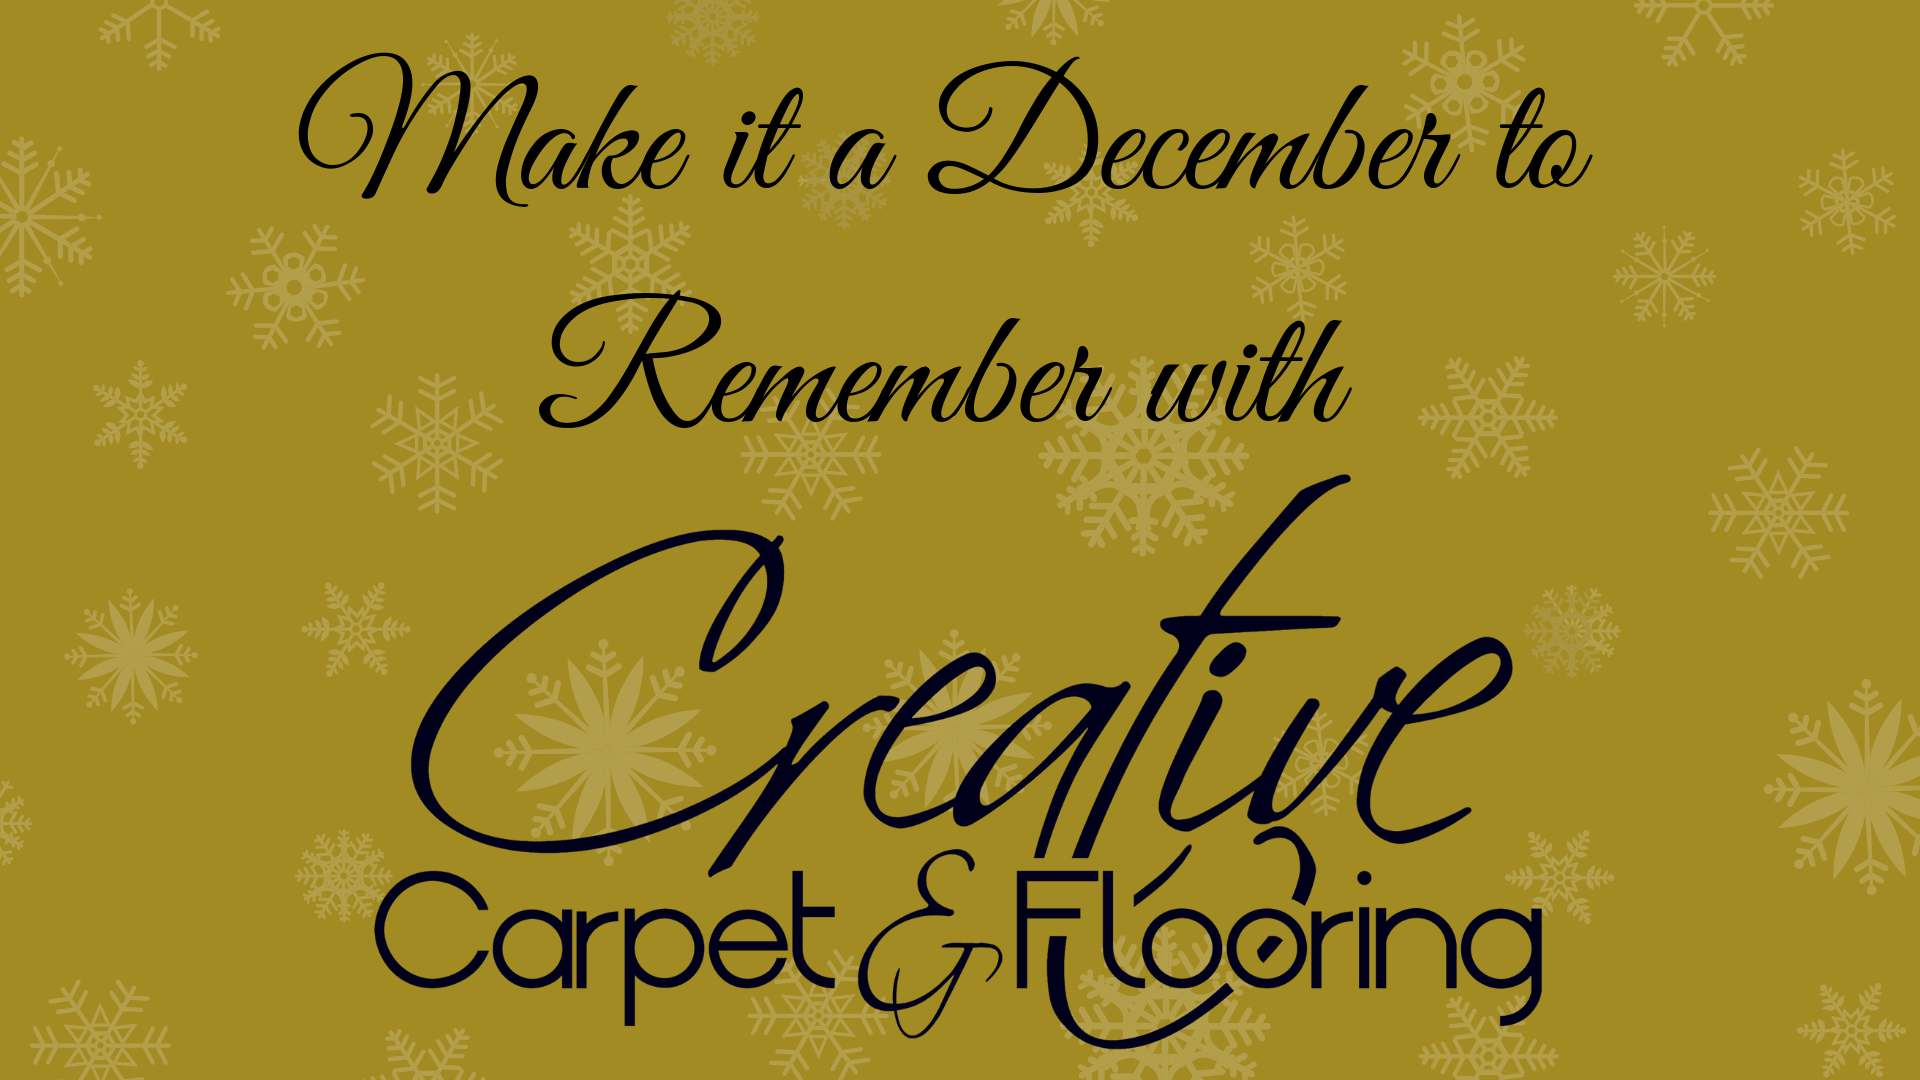 Thumbnail - December to Remember with Creative Carpet and Flooring